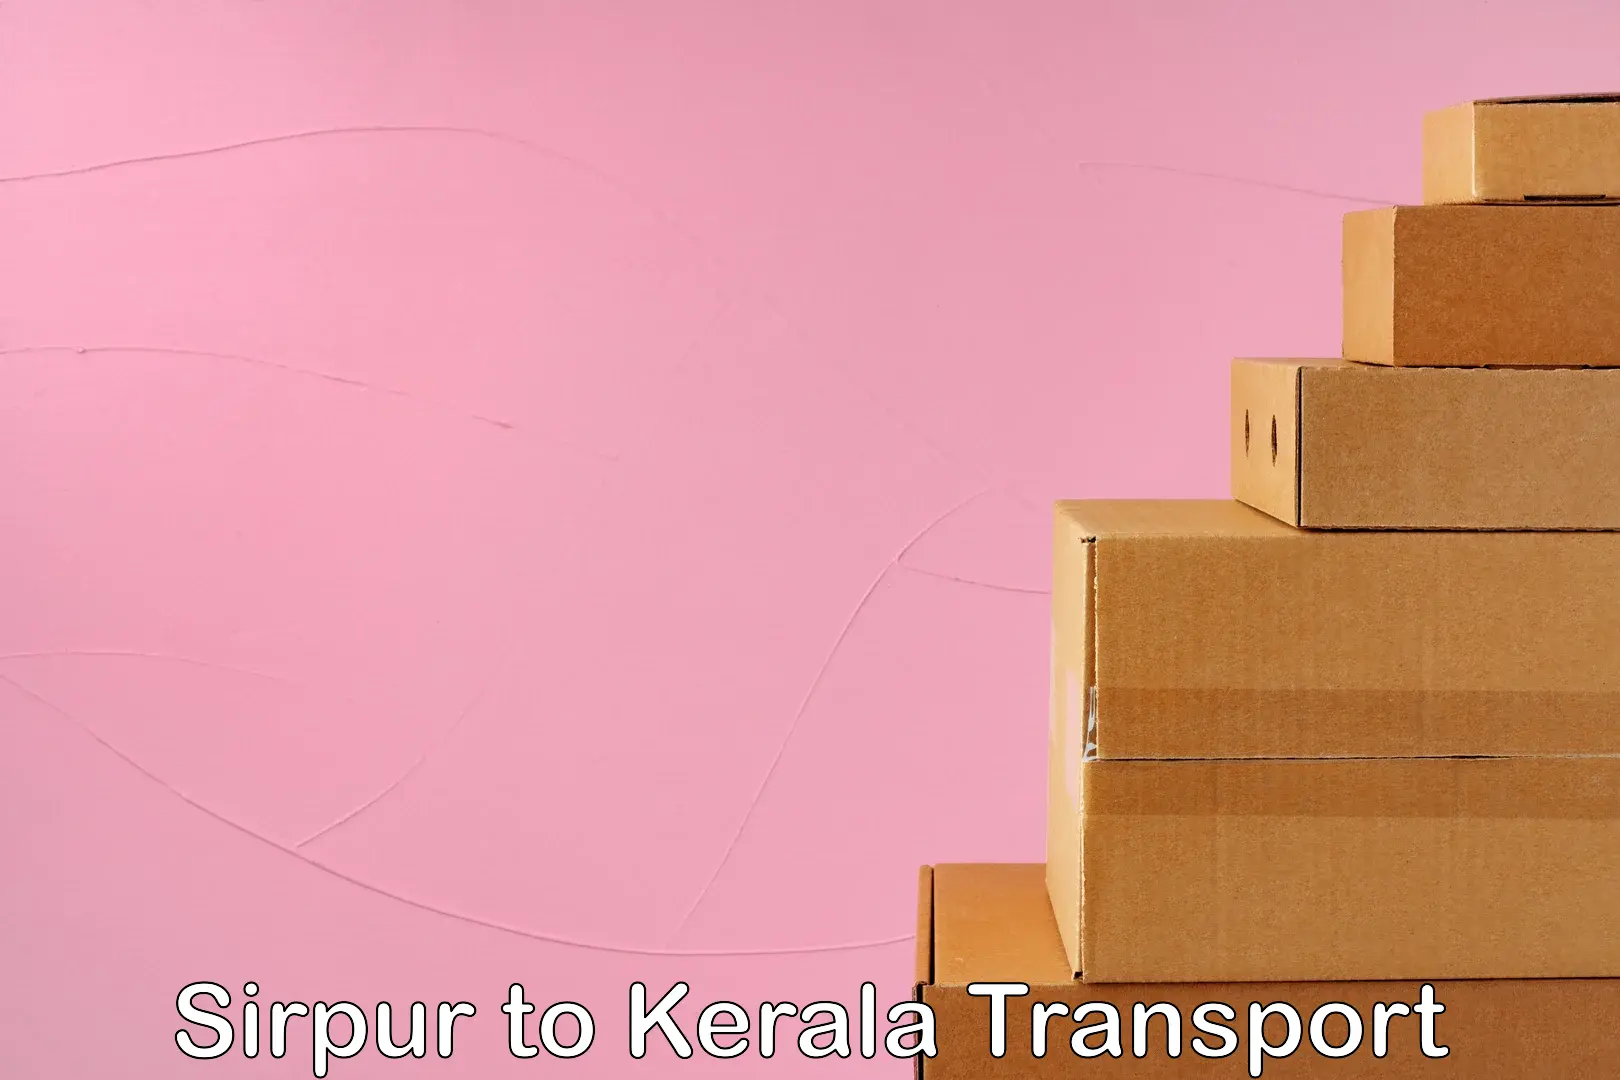 Delivery service Sirpur to Thrissur